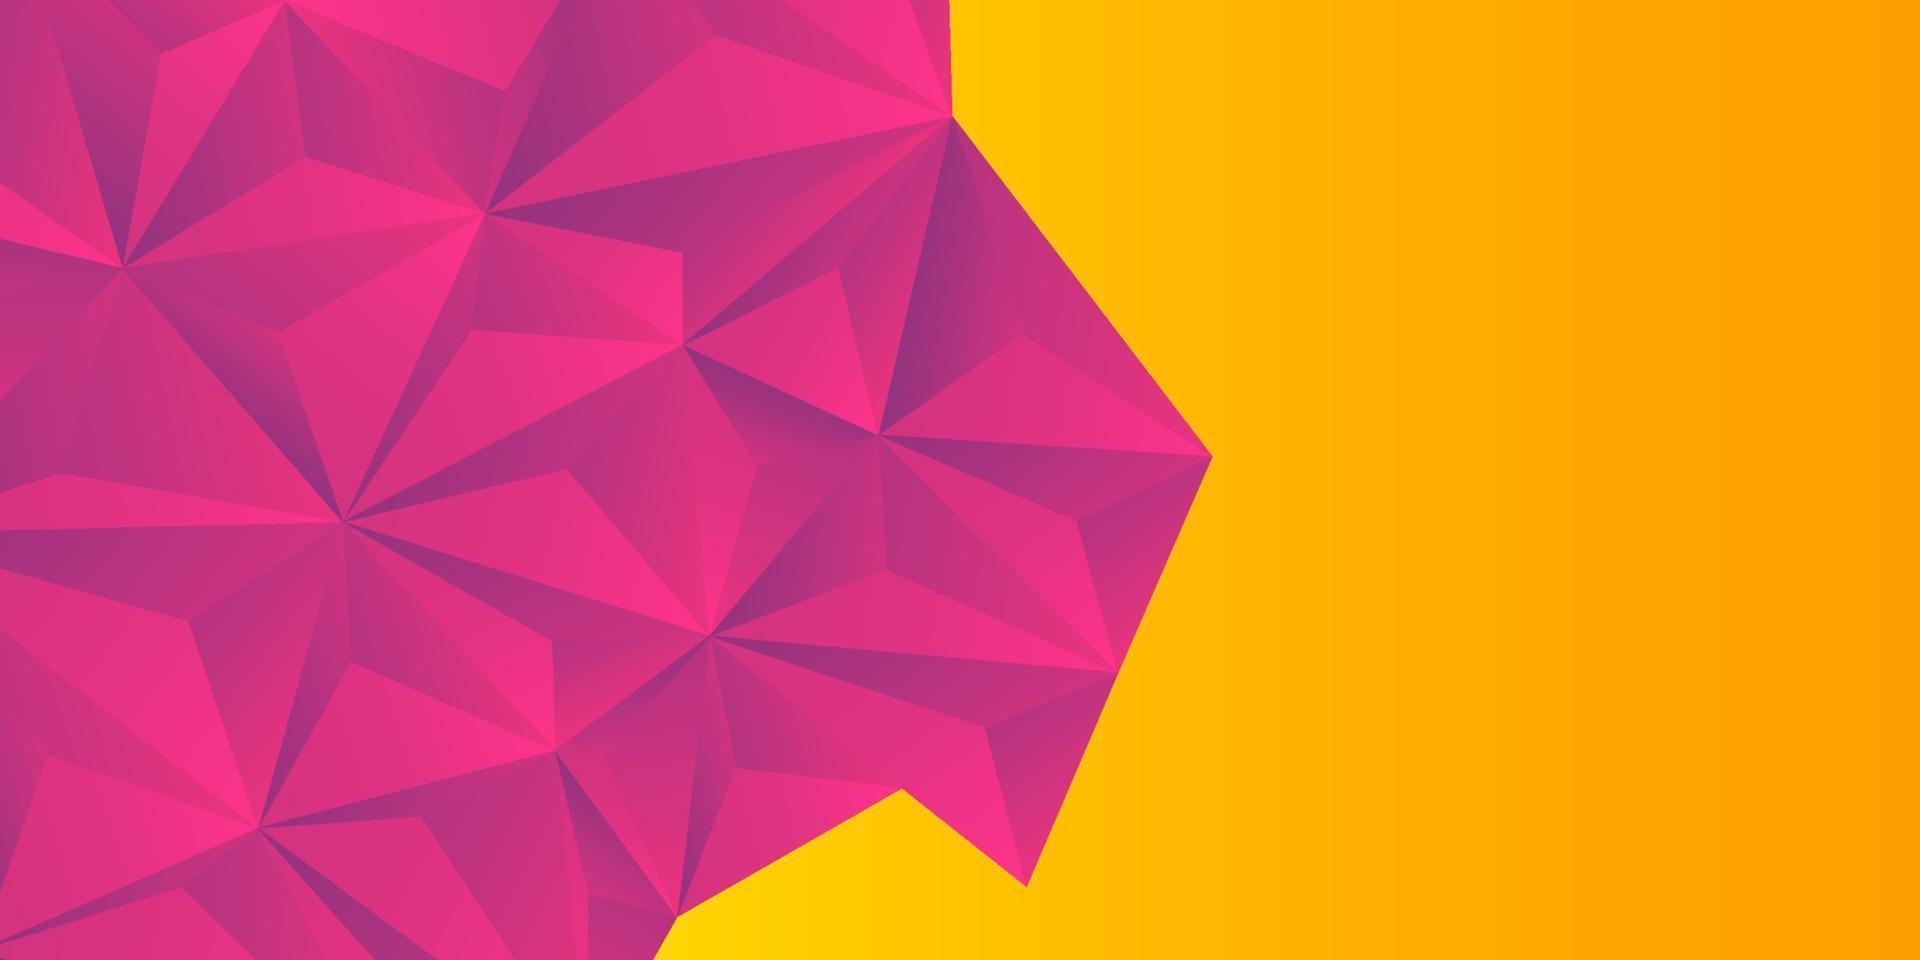 abstract pink background, low poly textured triangle shapes in random pattern, trendy lowpoly background Free Vector